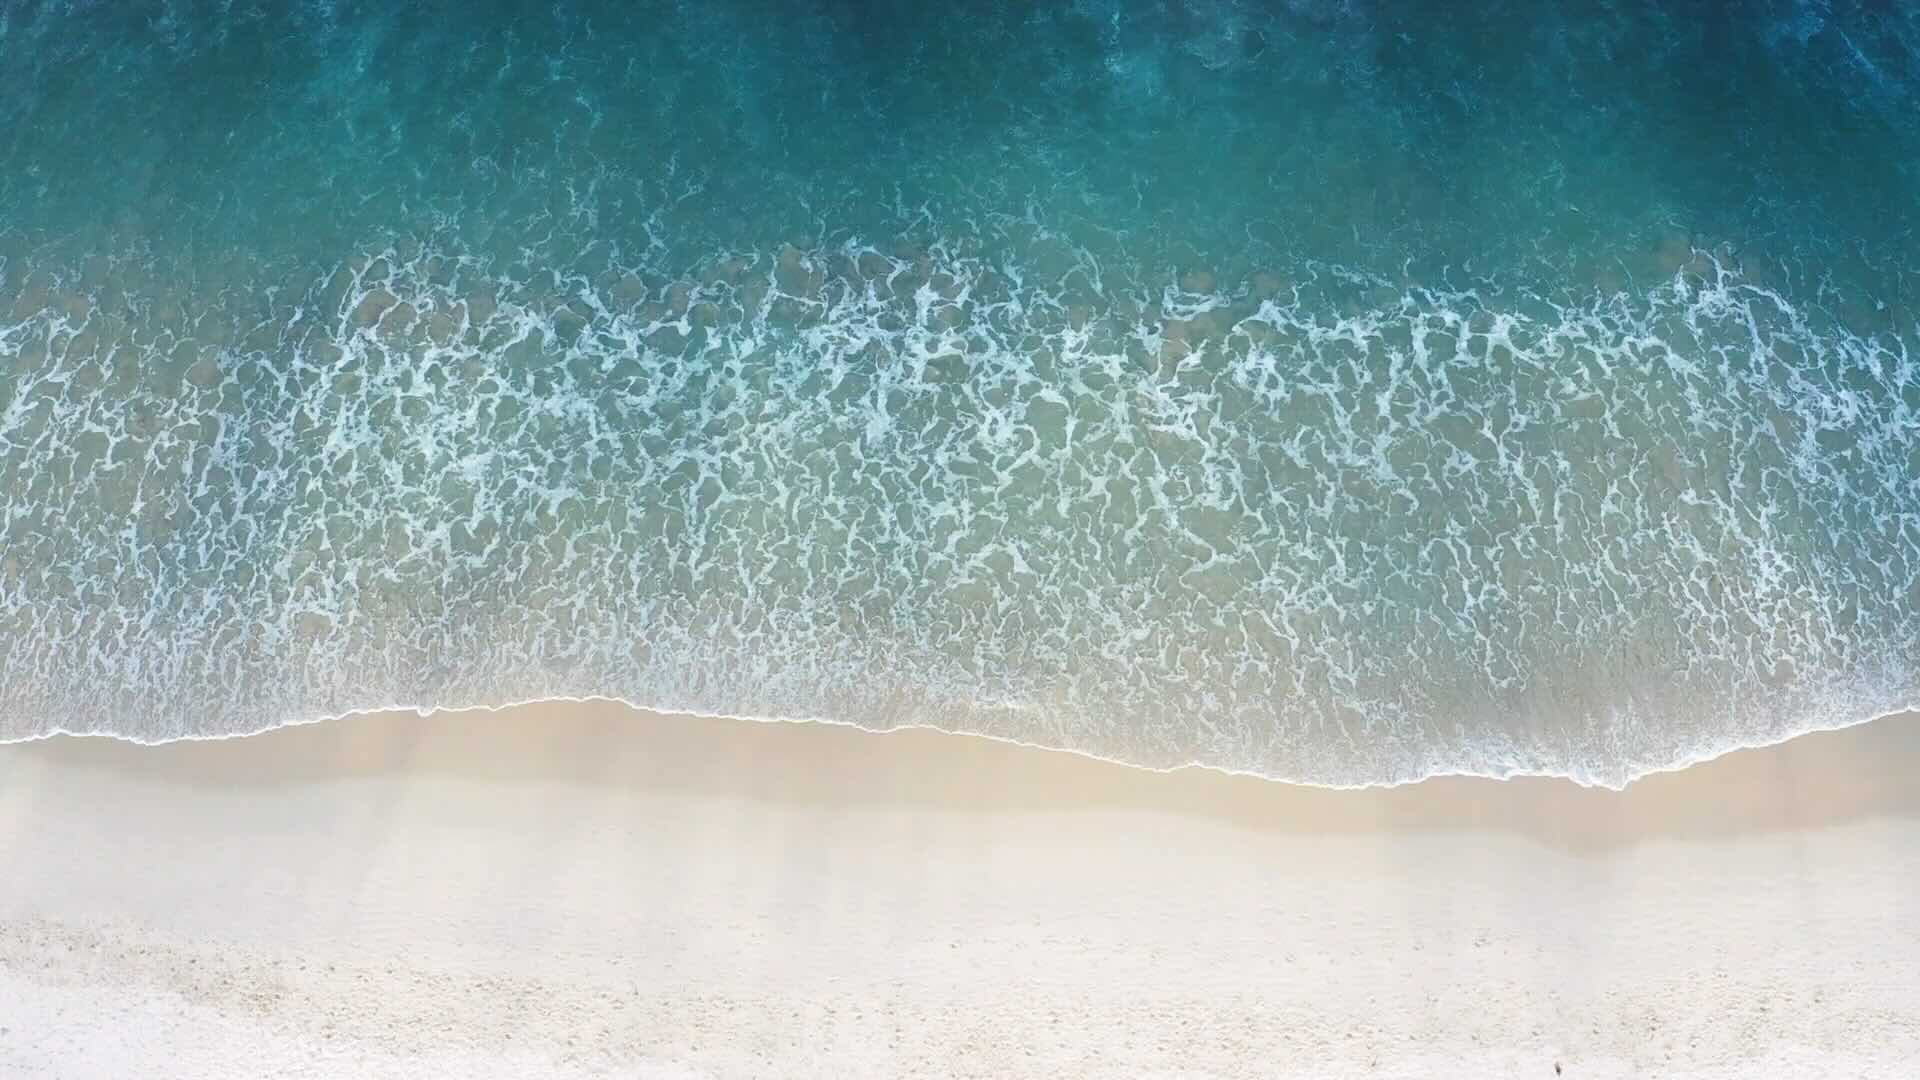 A view from above,  of a beach, with waves of a deep blue water gently crashing on the sand